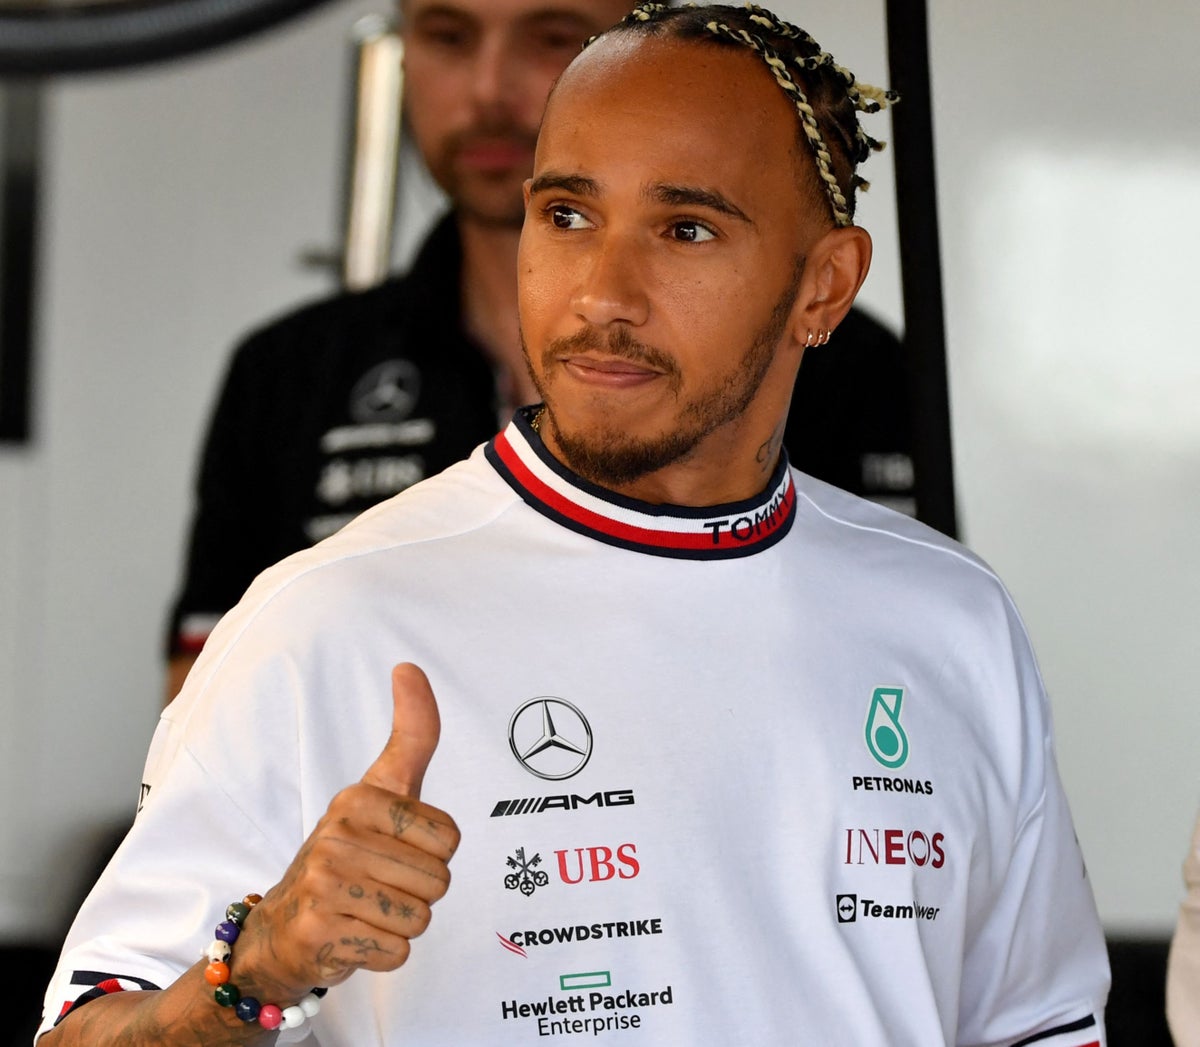 f1-practice-live:-lewis-hamilton-targets-strong-showing-in-fp2-after-leclerc-goes-fastest-in-fp1-at-french-gp